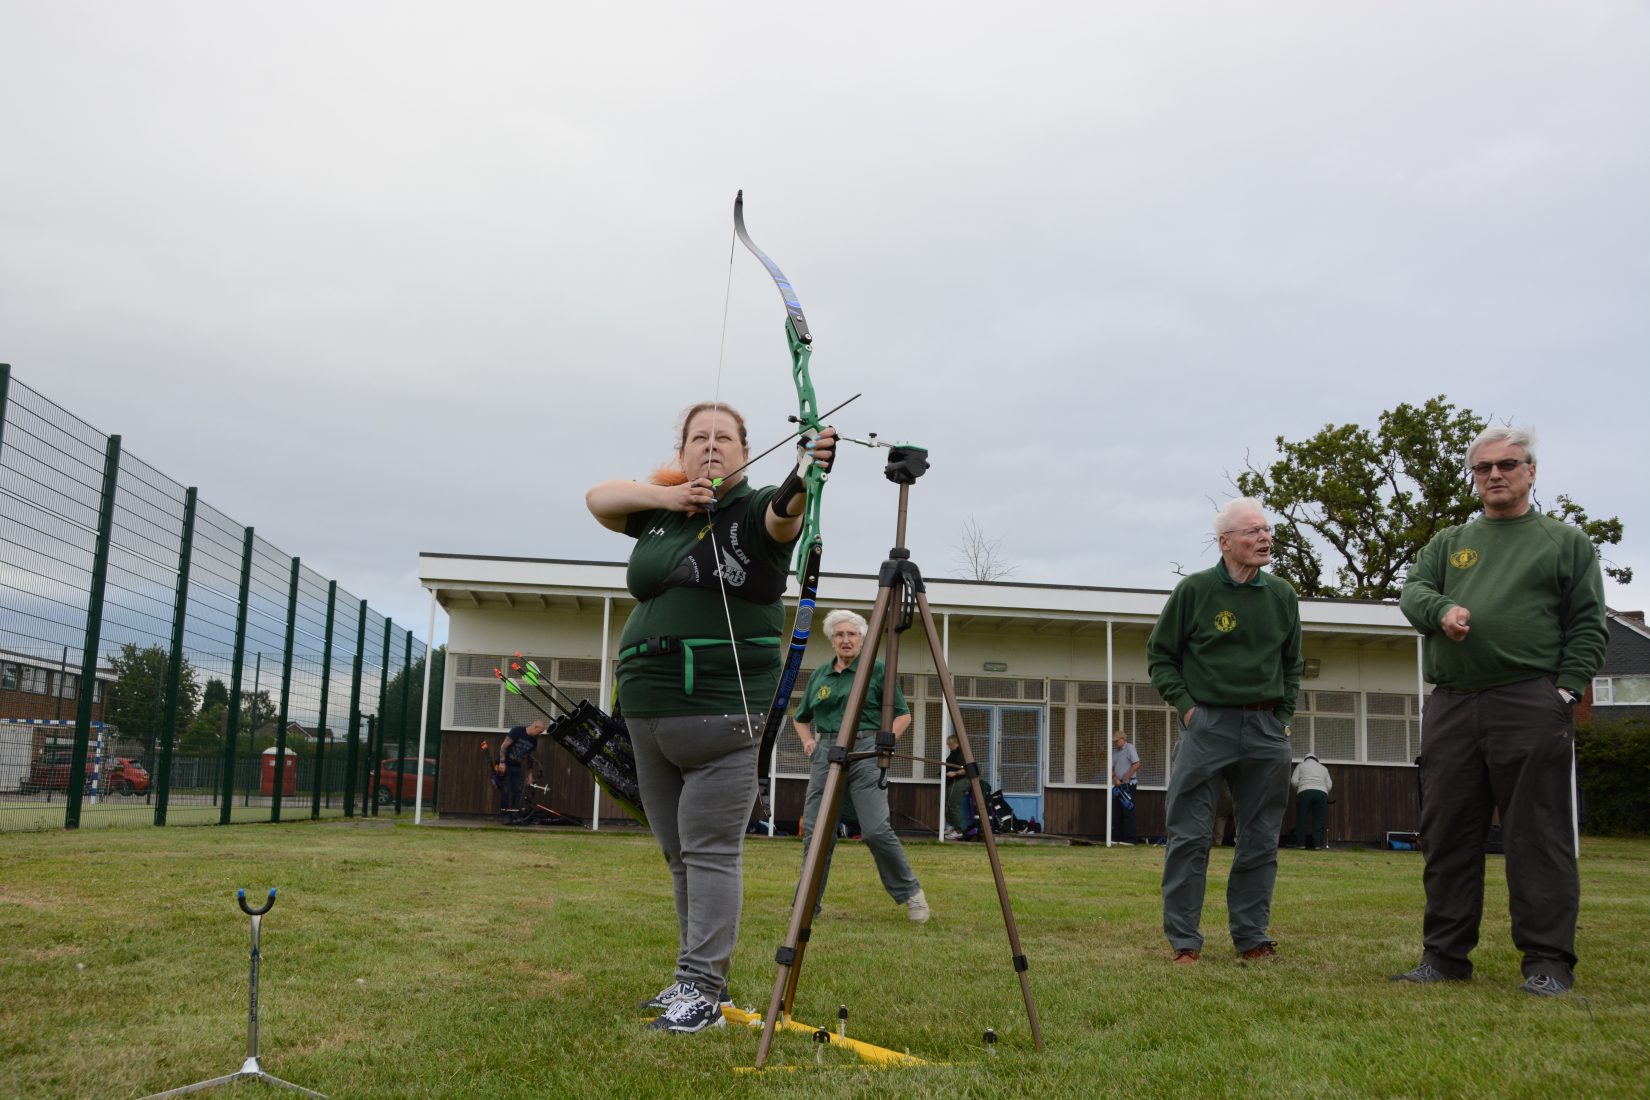 Photograph of a white woman, wearing a green polo top, standing in a field outside a sports club holding a bow and arrow. She draws her arrow to the right of the frame and her look and stance is defiant. The coach and spotter stand behind her.  